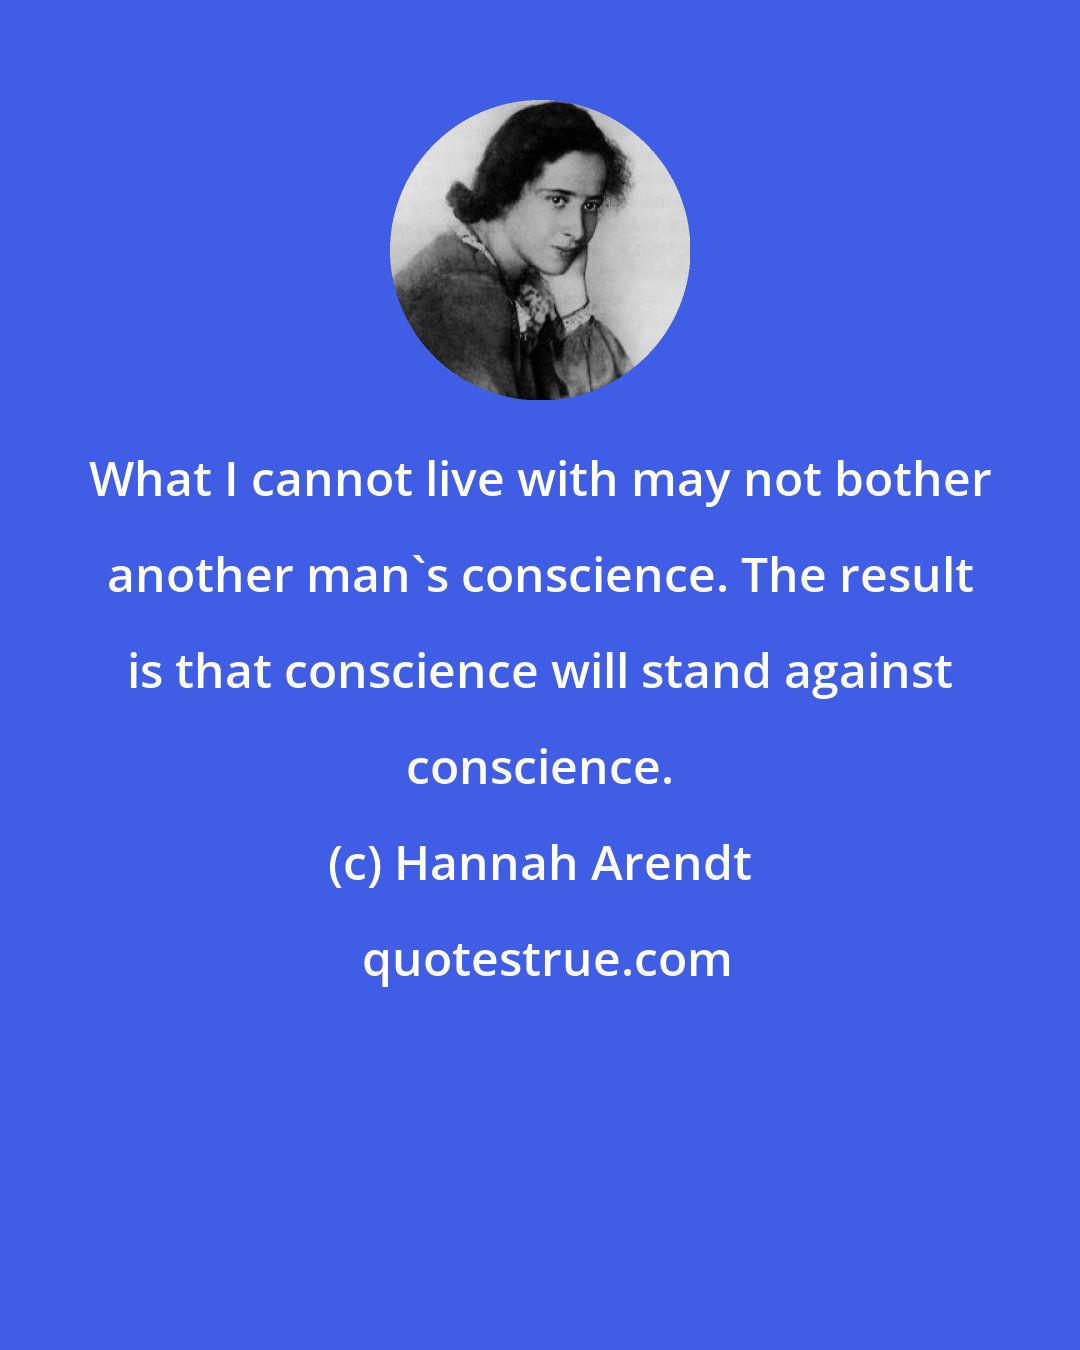 Hannah Arendt: What I cannot live with may not bother another man's conscience. The result is that conscience will stand against conscience.